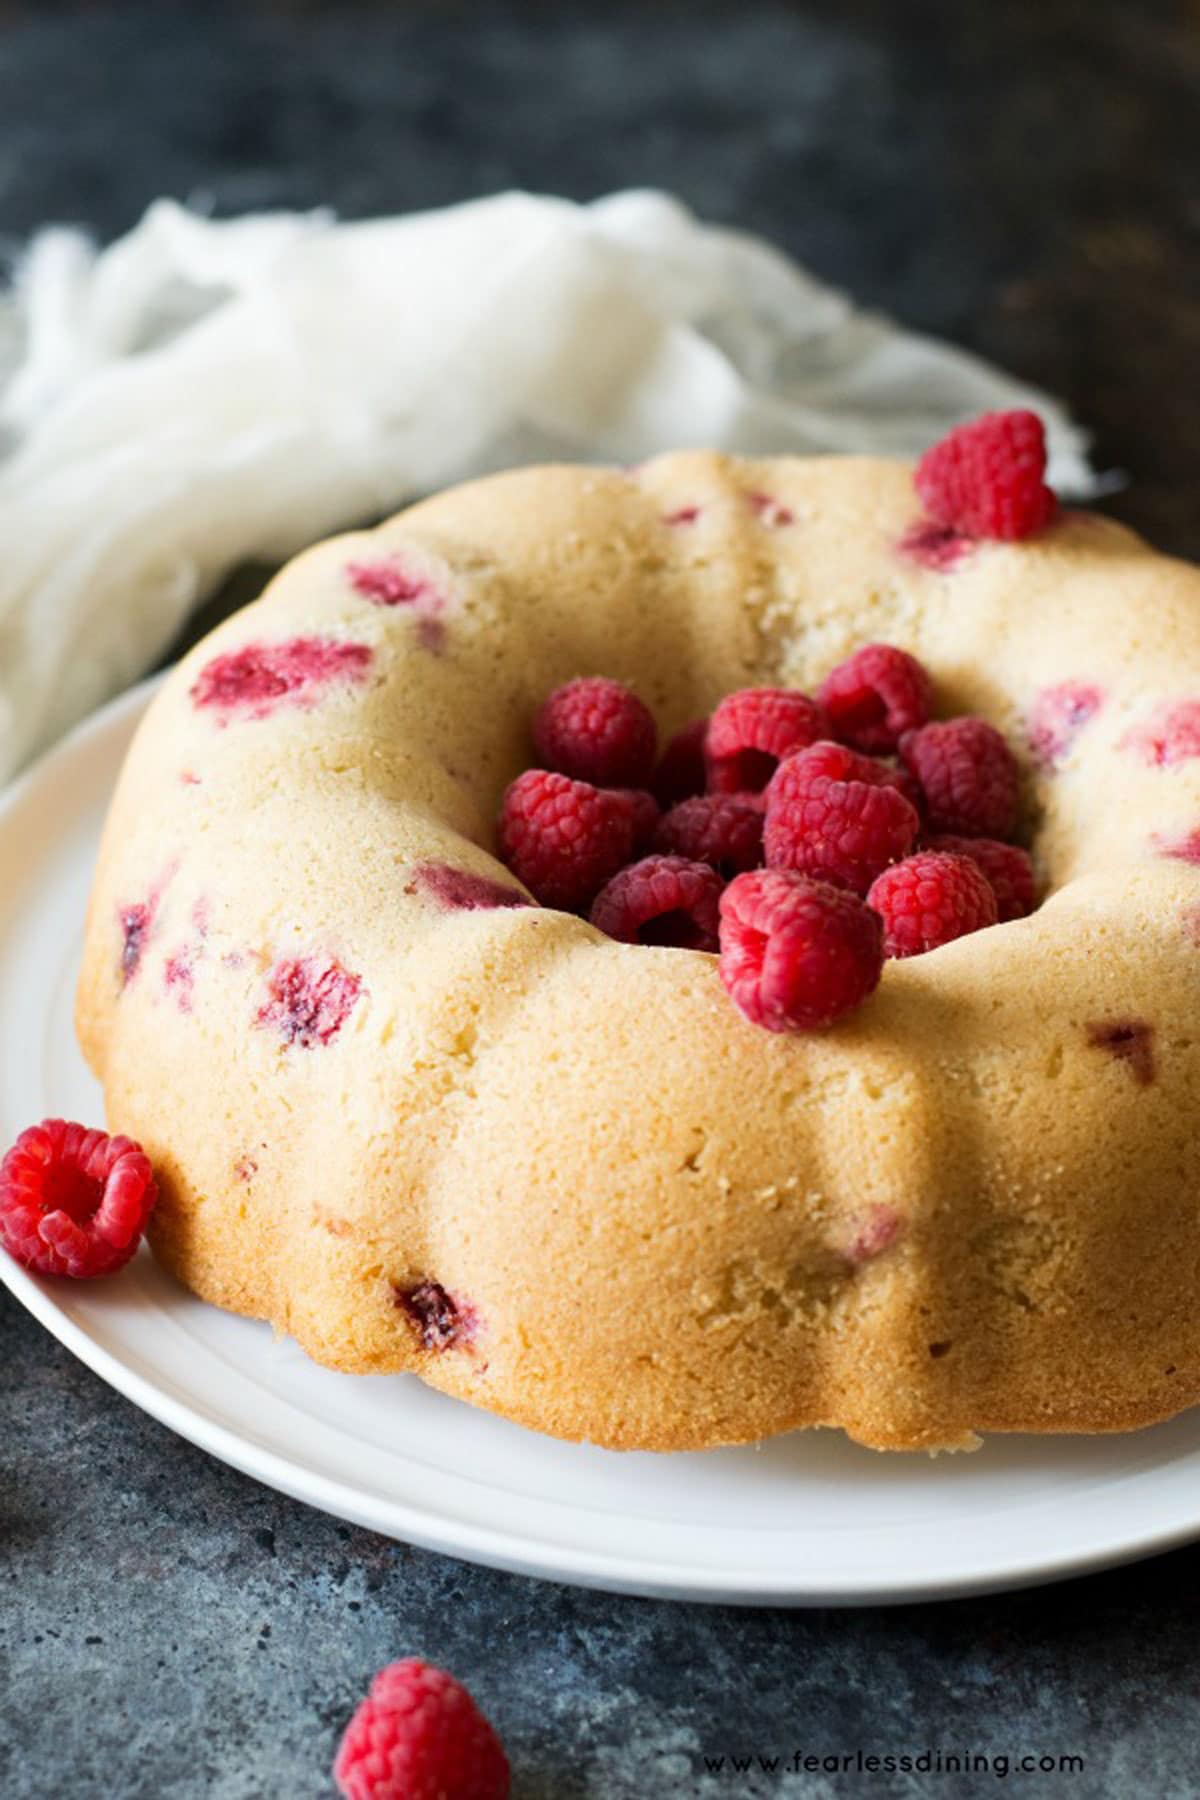 A vanilla bundt cake filled with fresh raspberries on a cake stand.